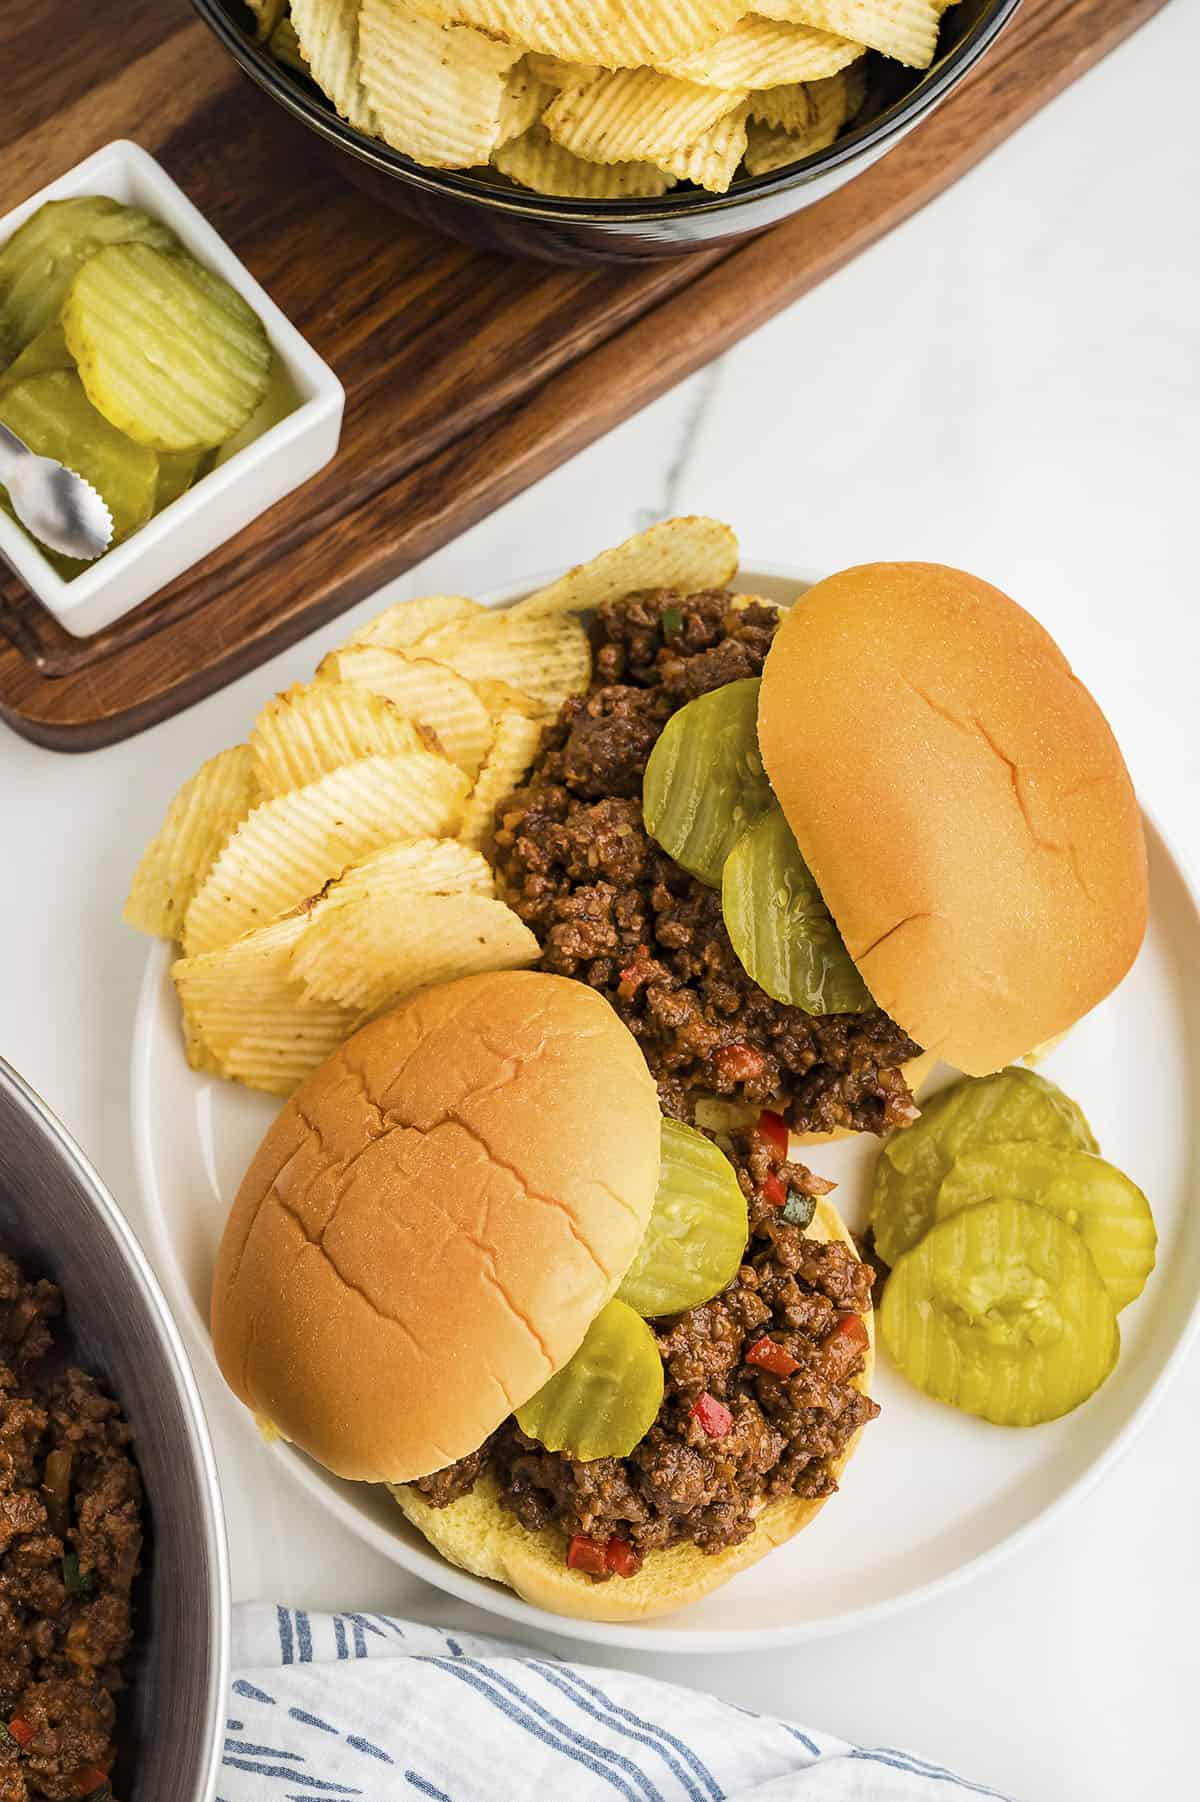 Overhead view of sloppy joes on white plate.